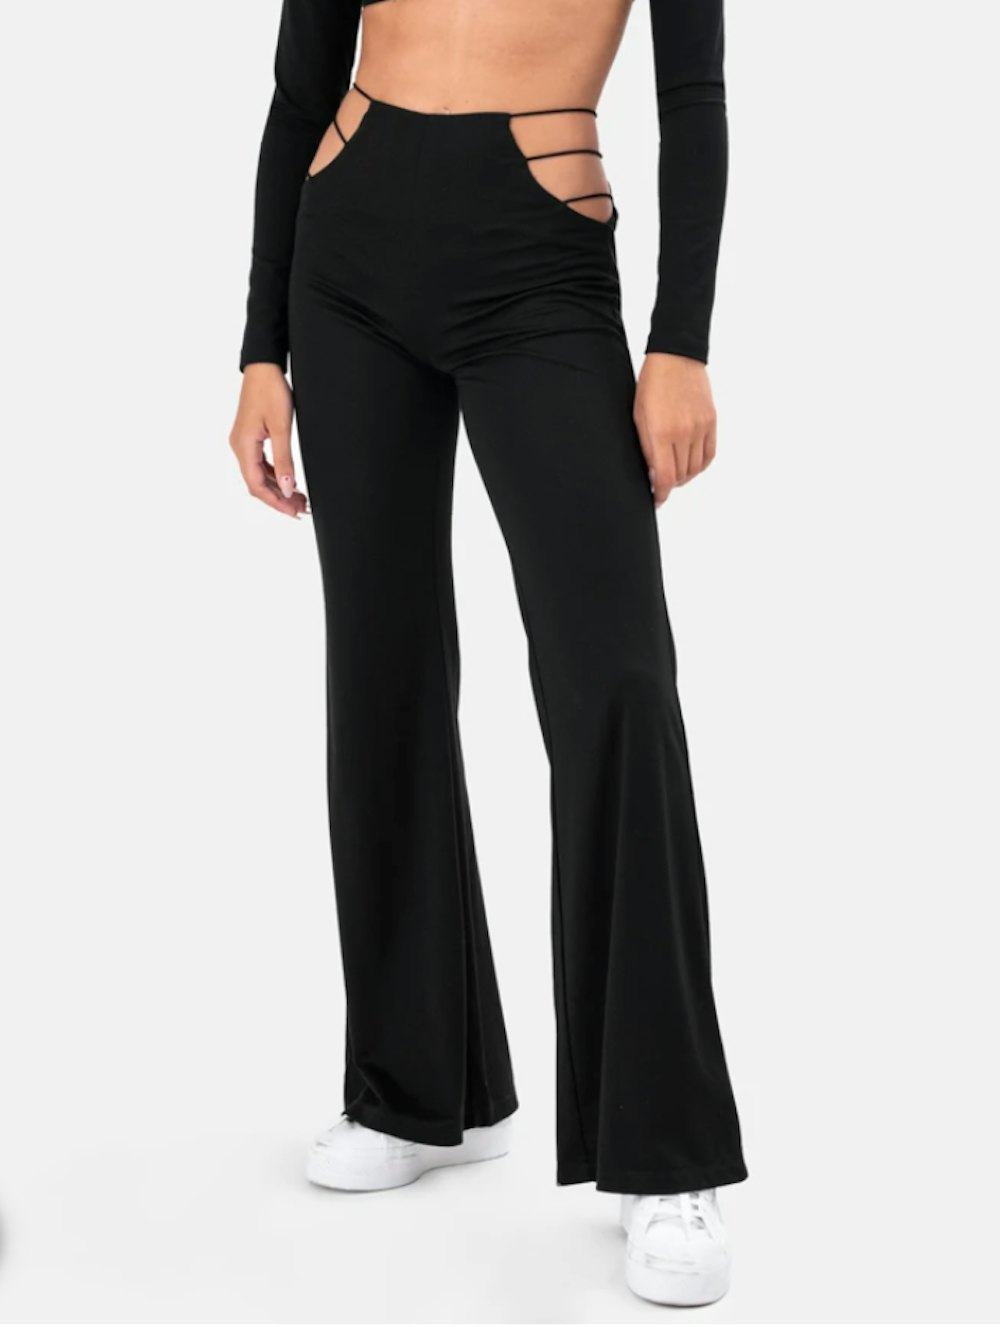 Empire Flare Cut-Out Pants